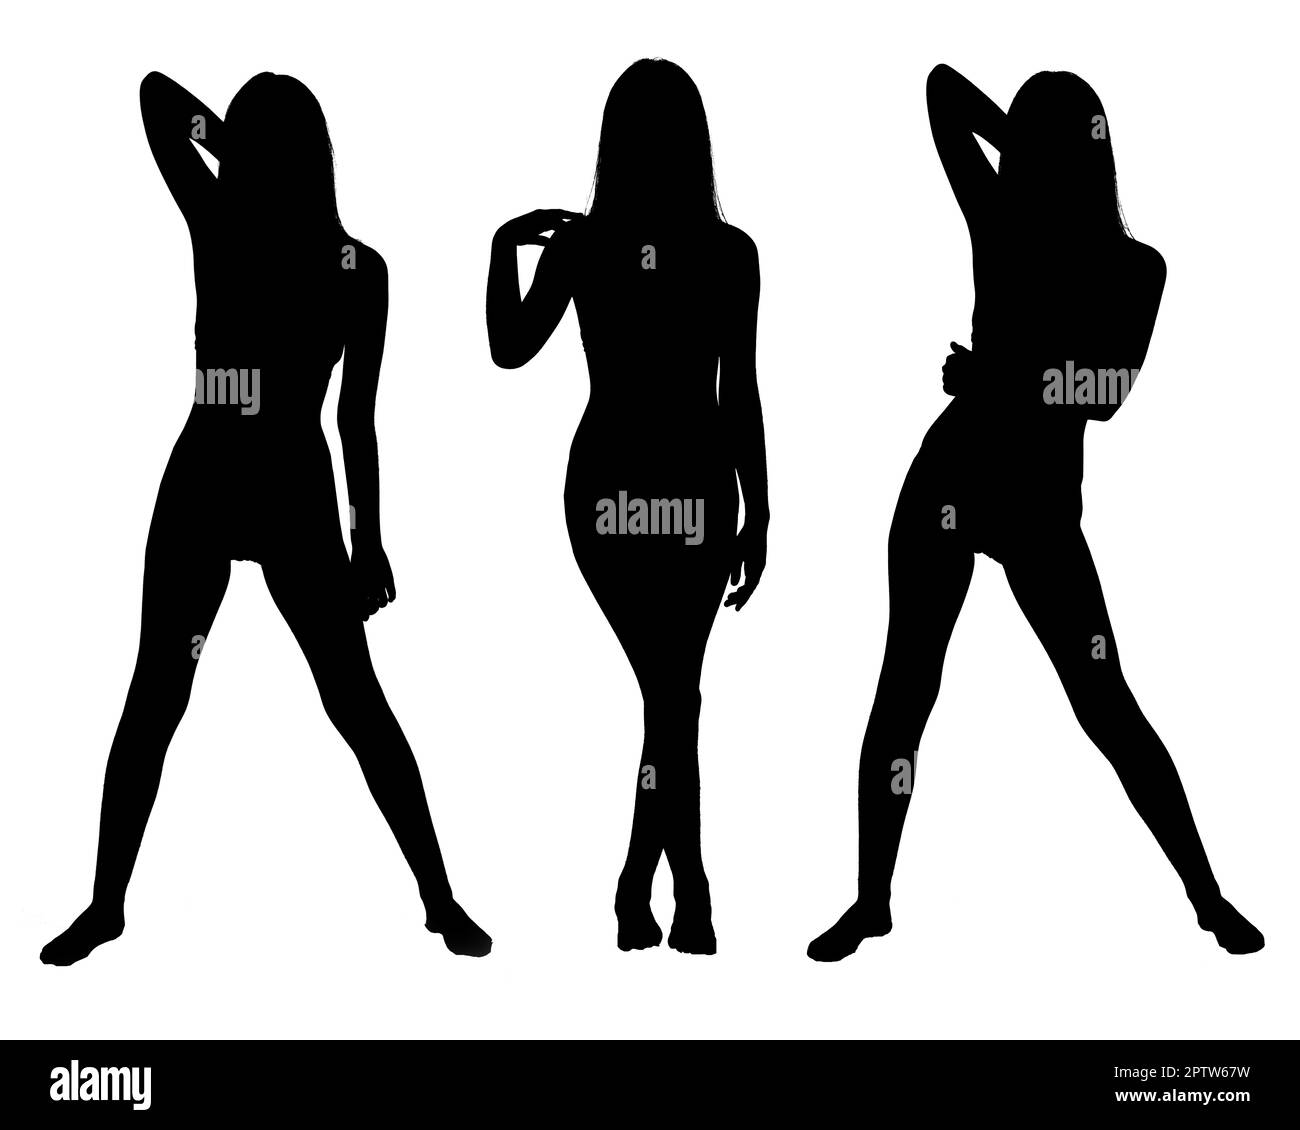 Black silhouettes of a teenager girl in different poses isolated on a white background. High resolution. Stock Photo